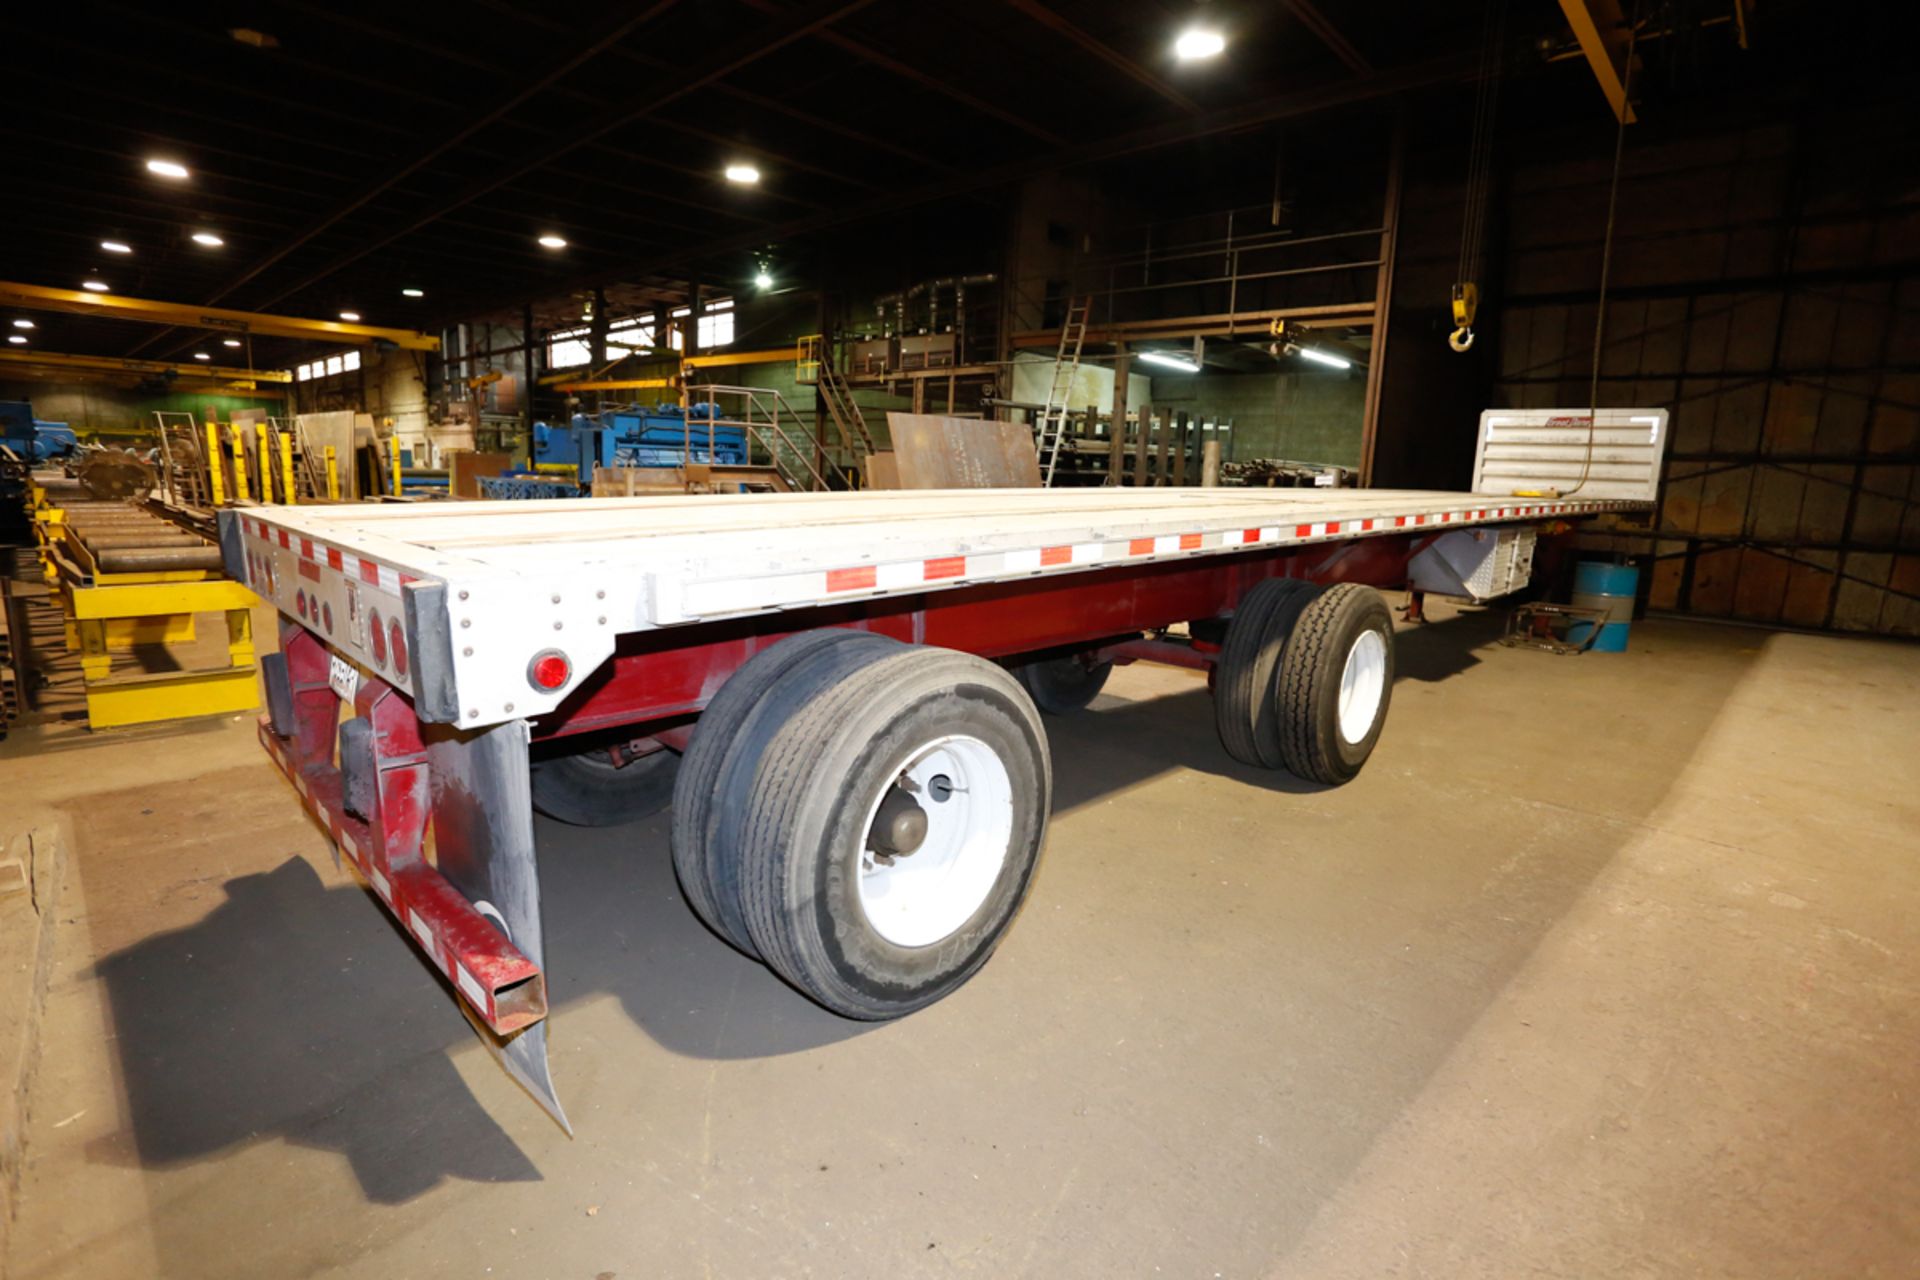 GREAT DANE (2006) 48' FLAT BED TRAILER, ALUMINUM BED, DOUBLE AXLE, NET WEIGHT: 4250 KG, VIN: - Image 3 of 4